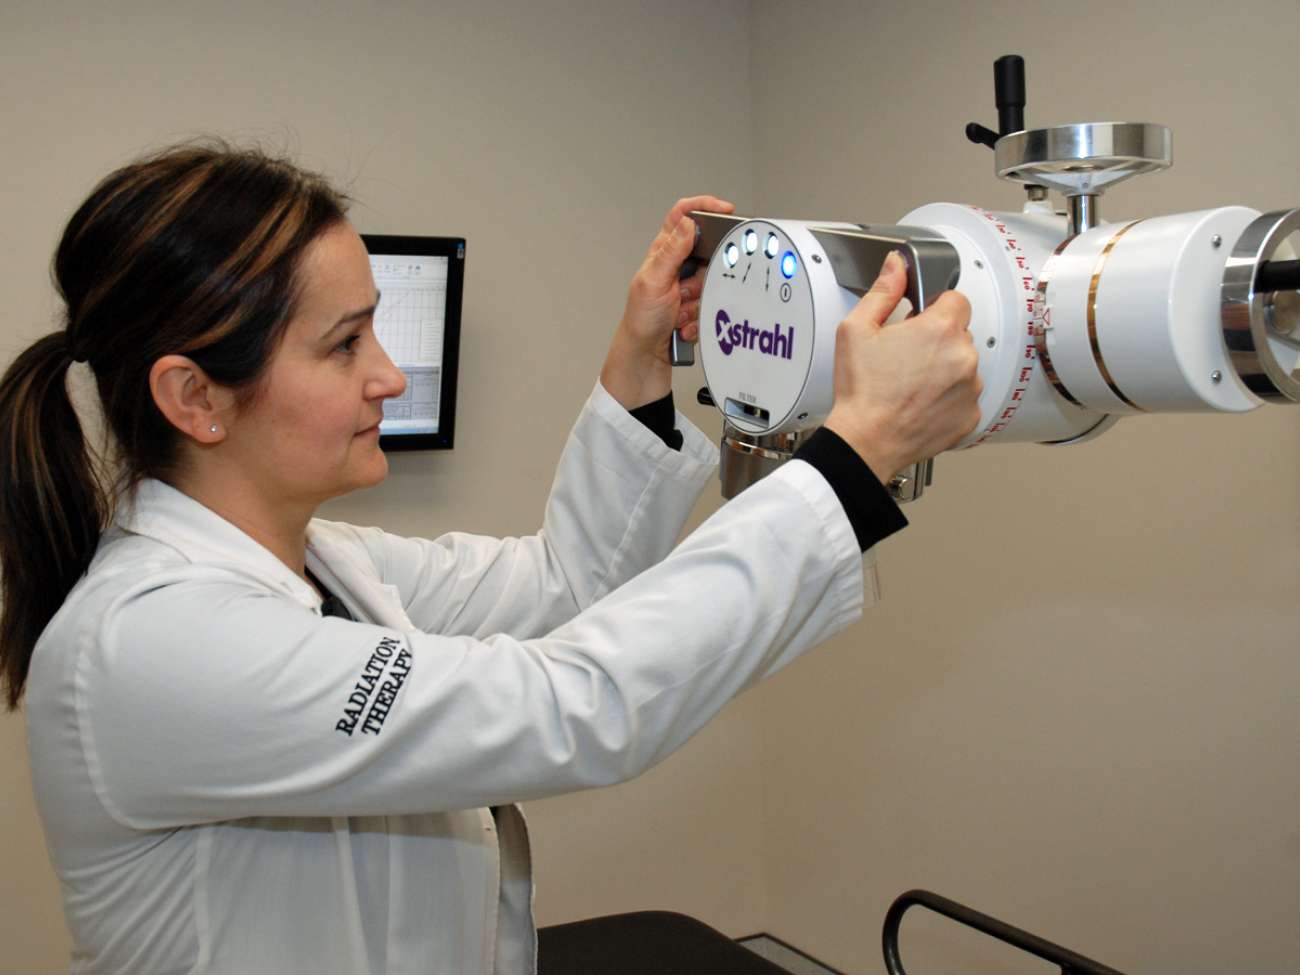 Radiation therapist Andrea Tonin positions the new orthovoltage unit to provide care for a patient.